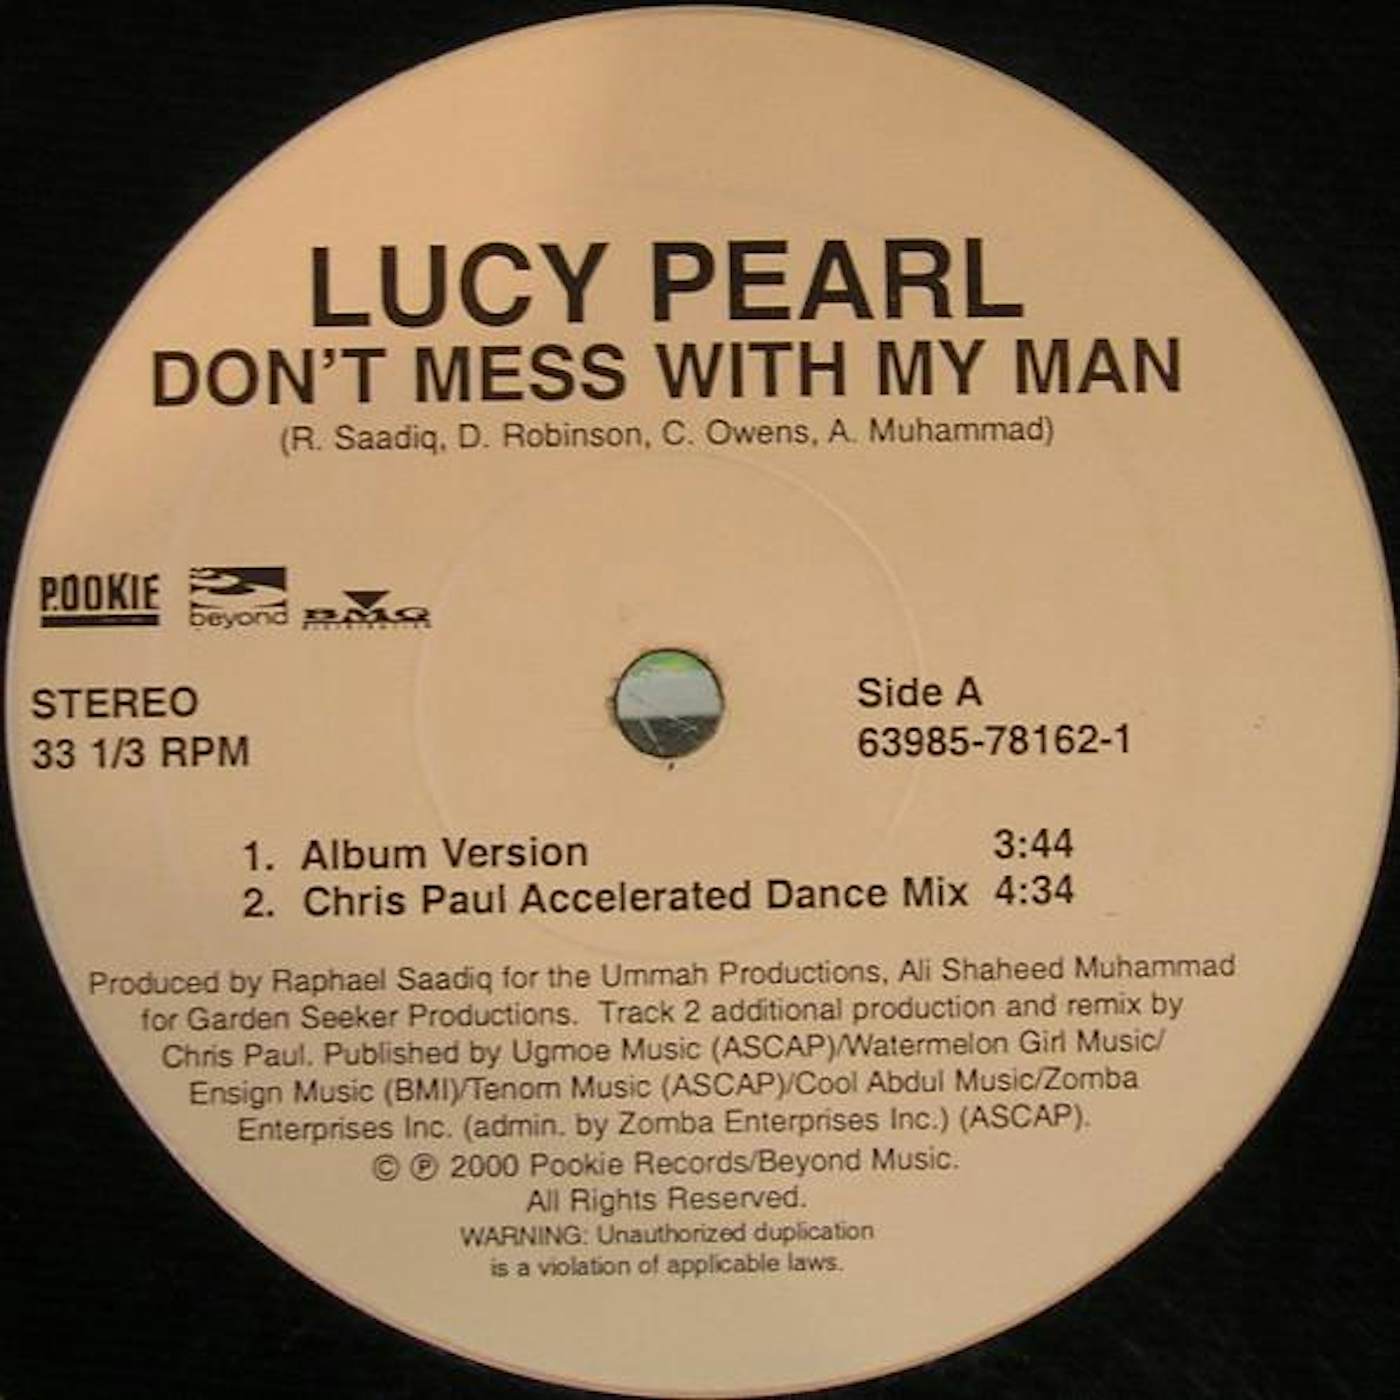 glans genezen Pijler Lucy Pearl DON'T MESS WITH NY MAN (X5) Vinyl Record